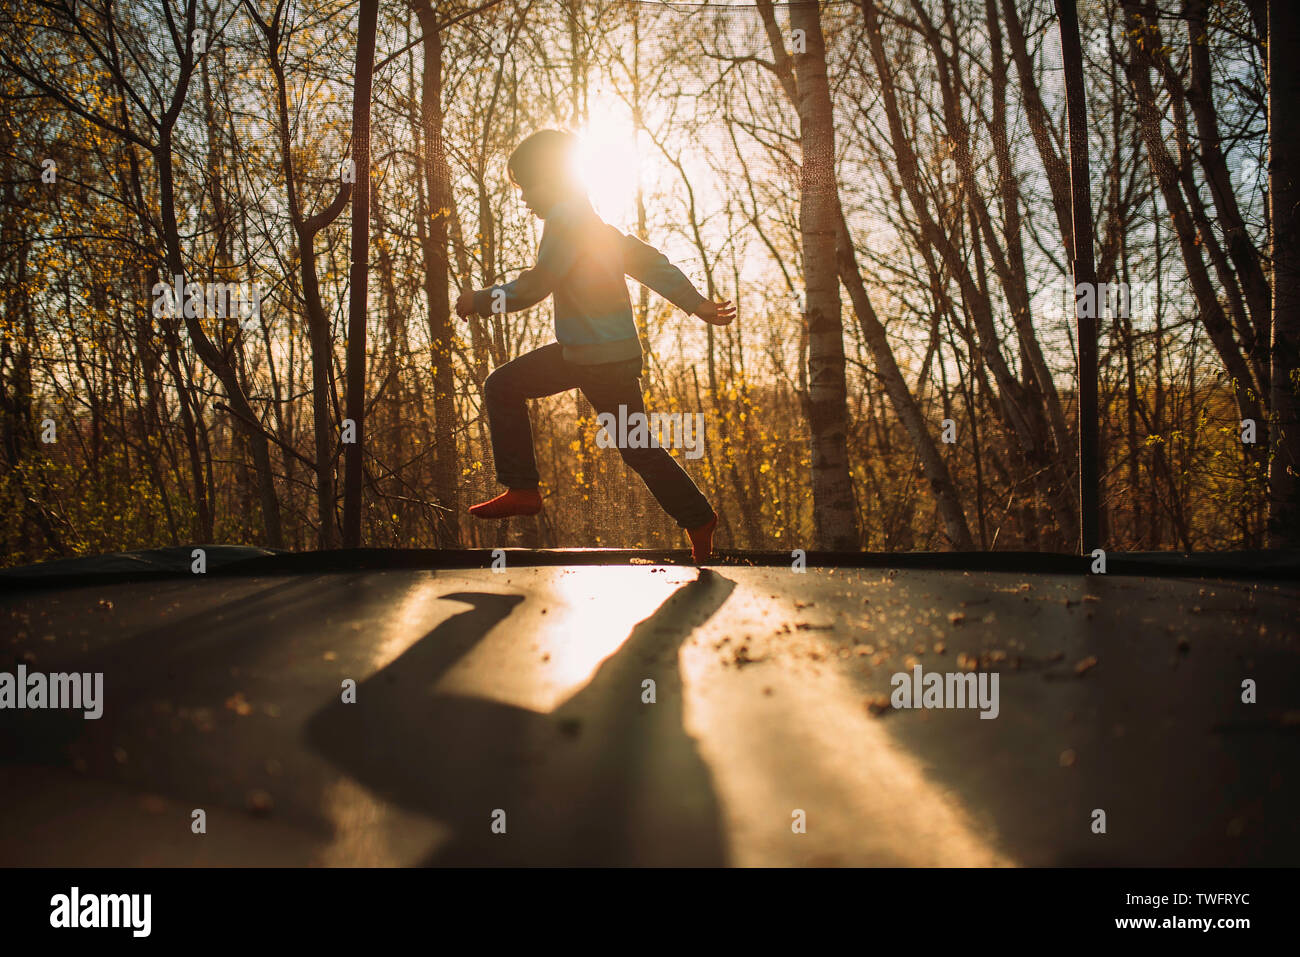 Silhouette of a boy on a trampoline at sunset Stock Photo